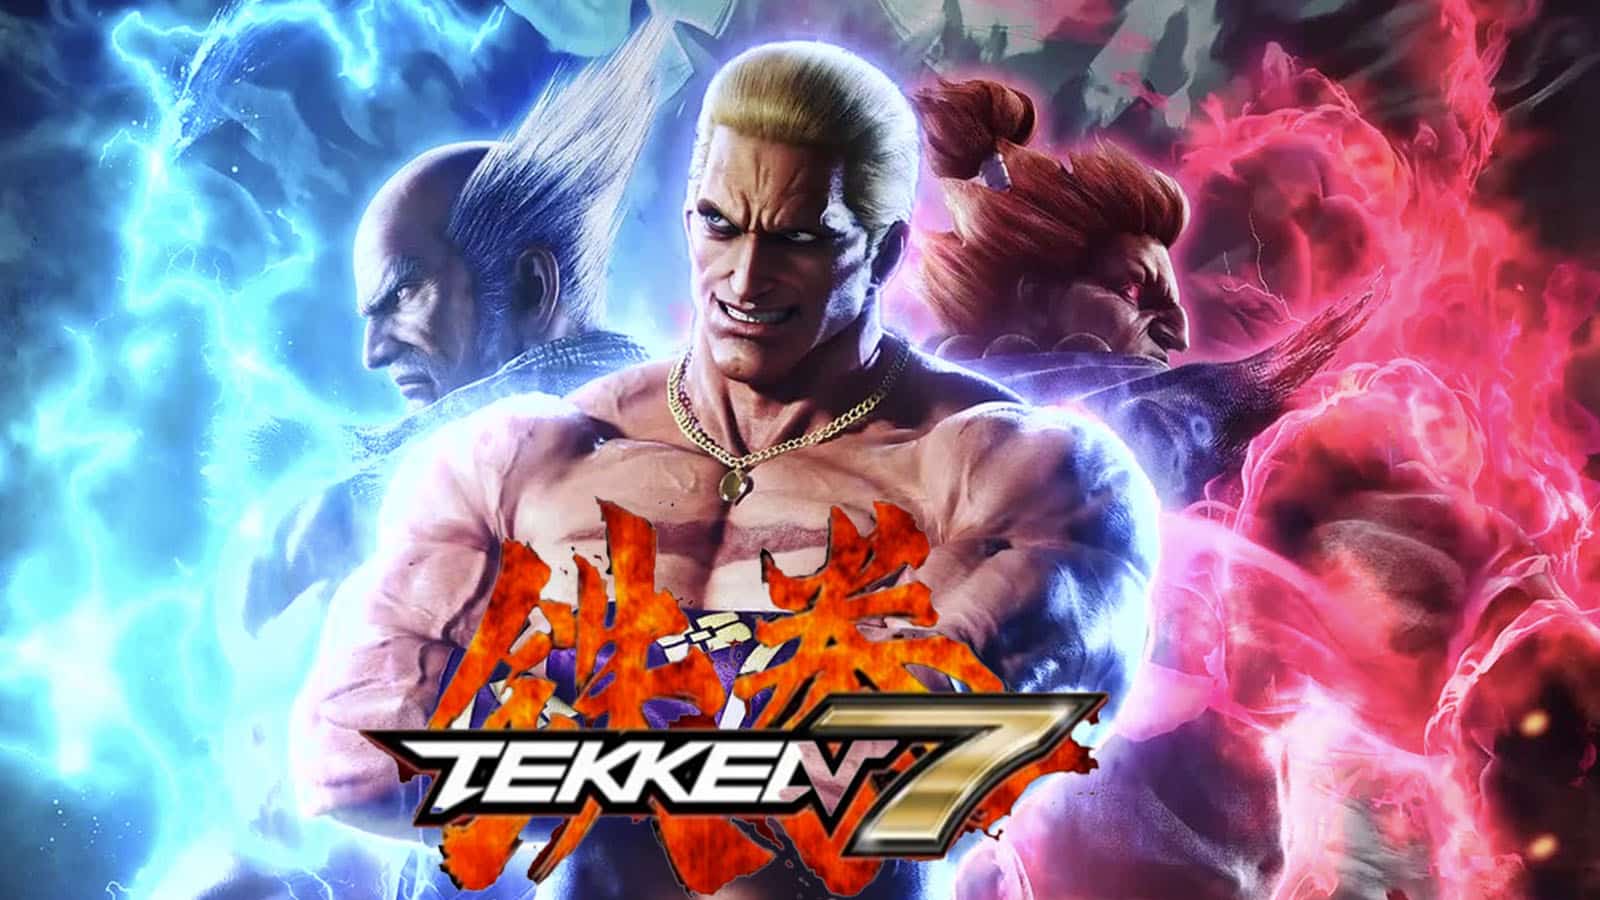 Street Fighter X Tekken may soon return to PC after being rendered